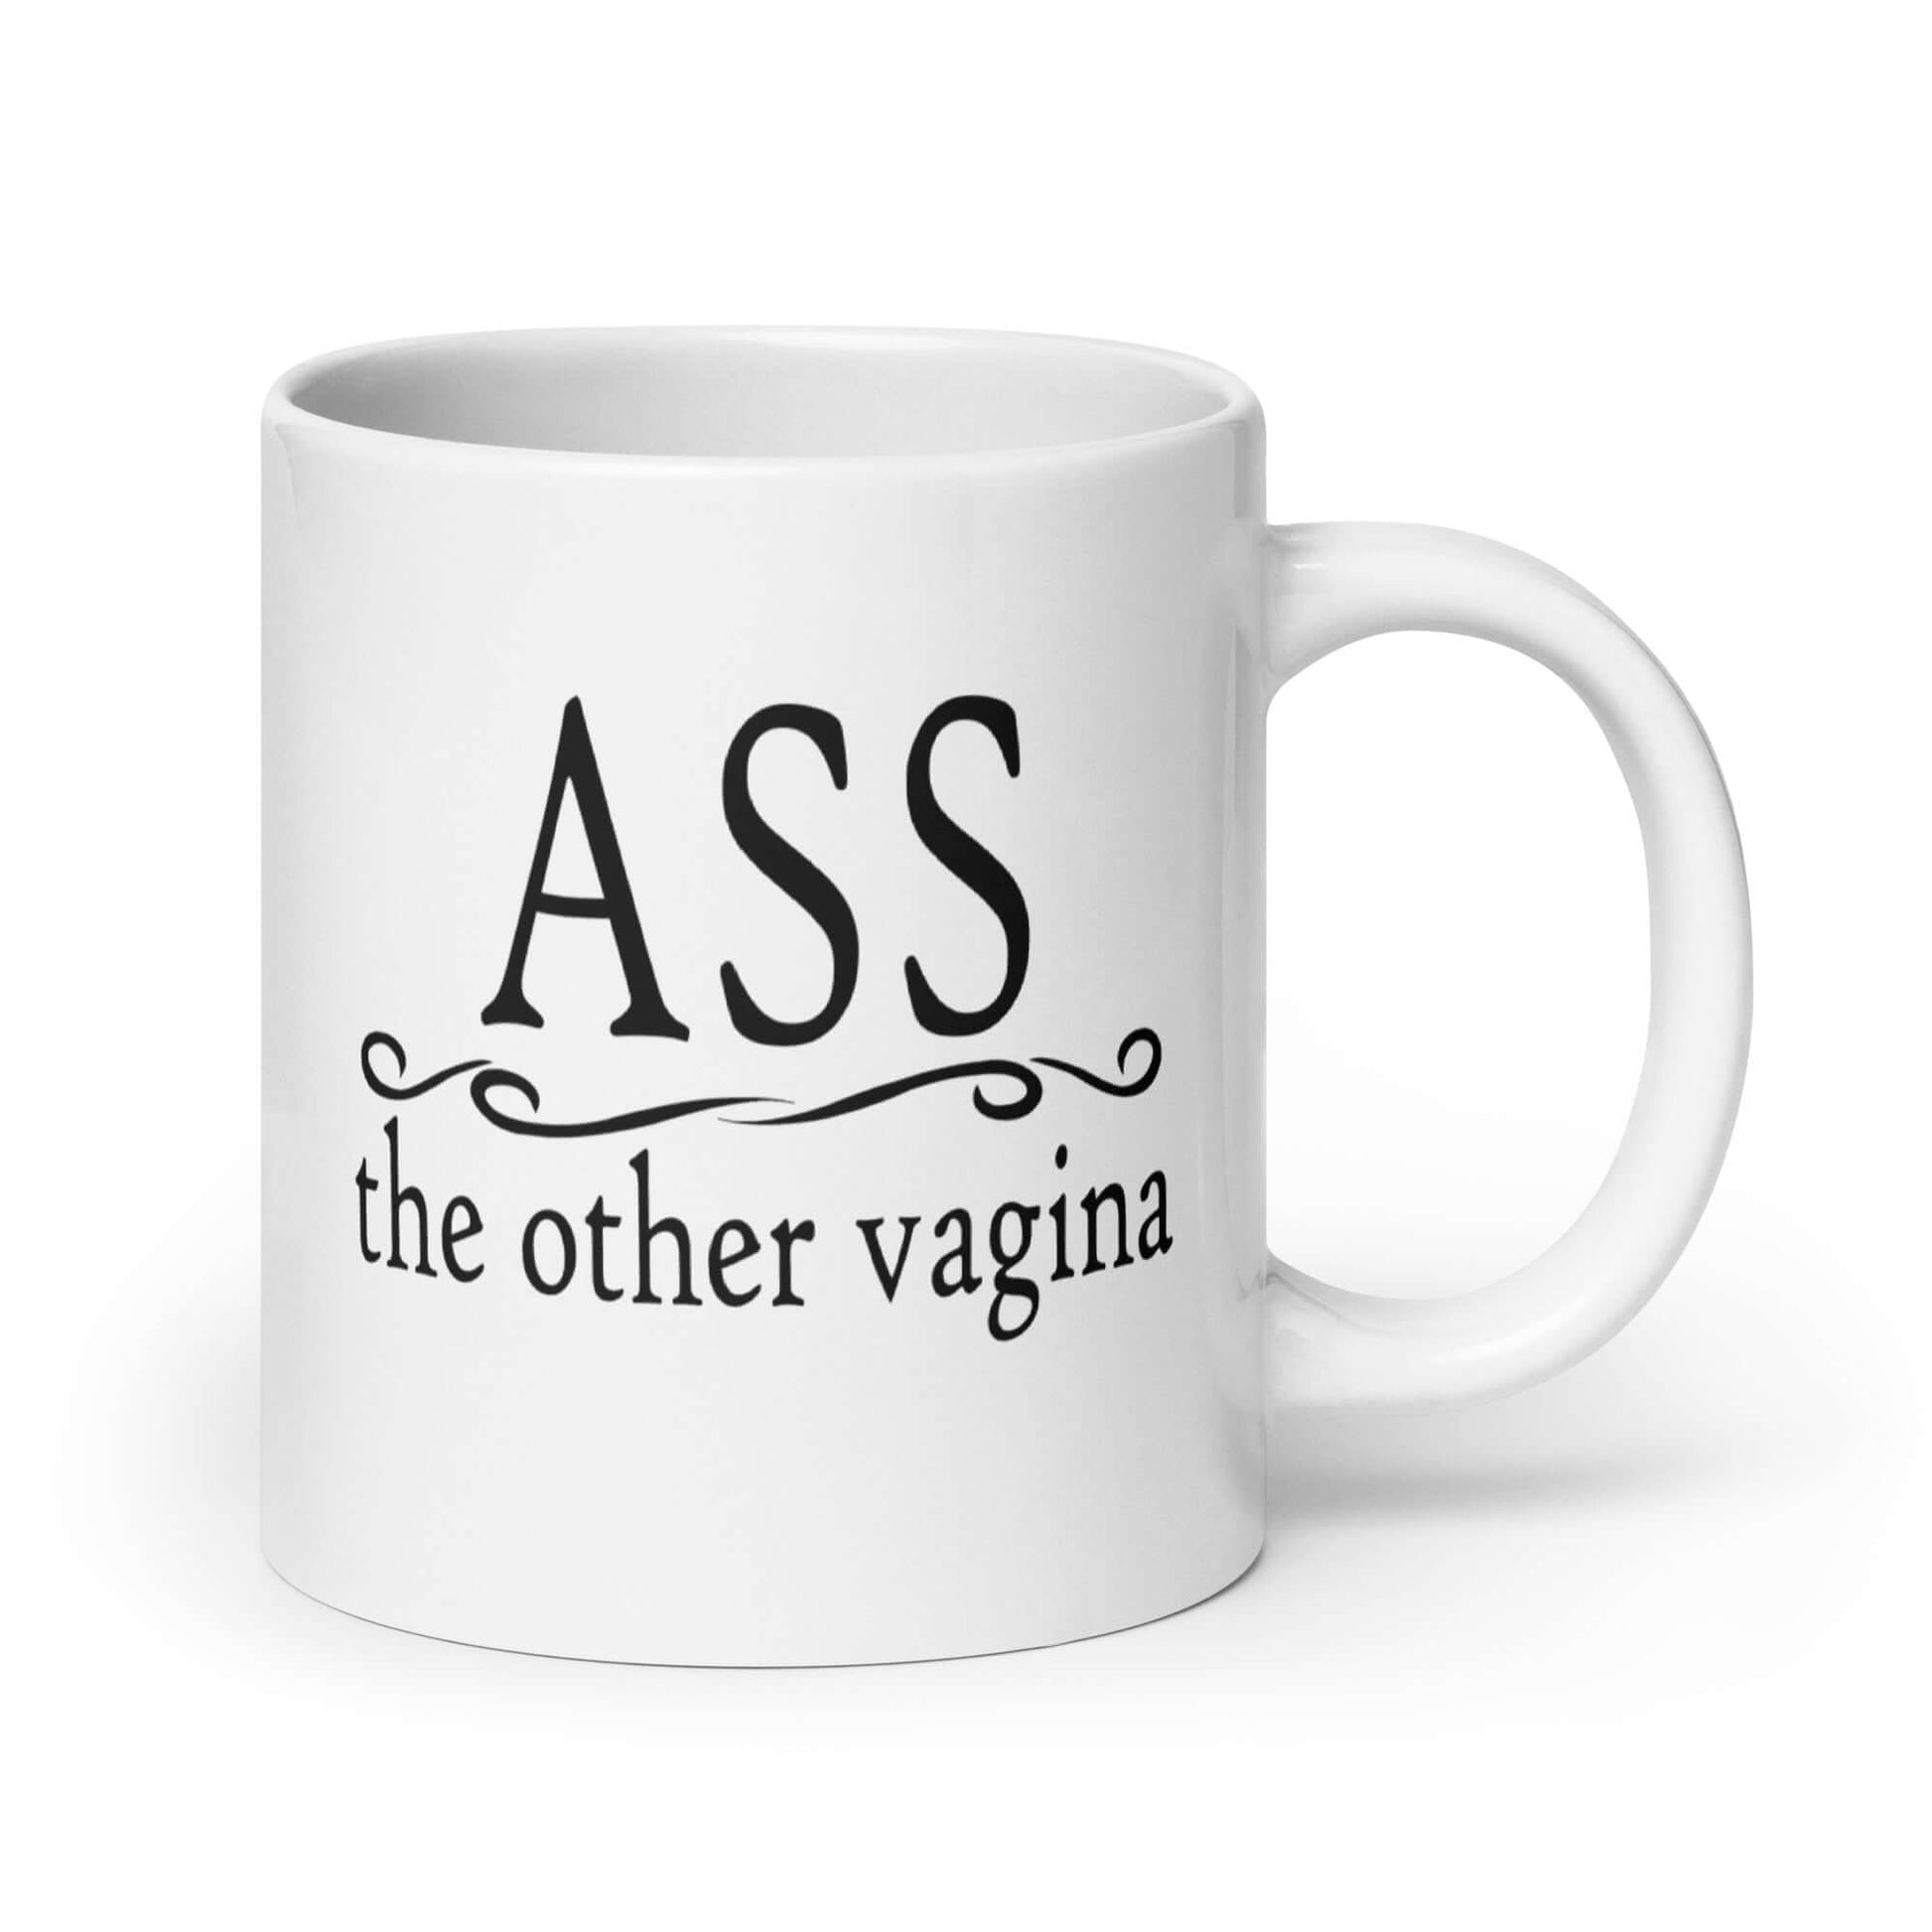 20 ounce ceramic coffee mug that says Ass- the other vagina on it